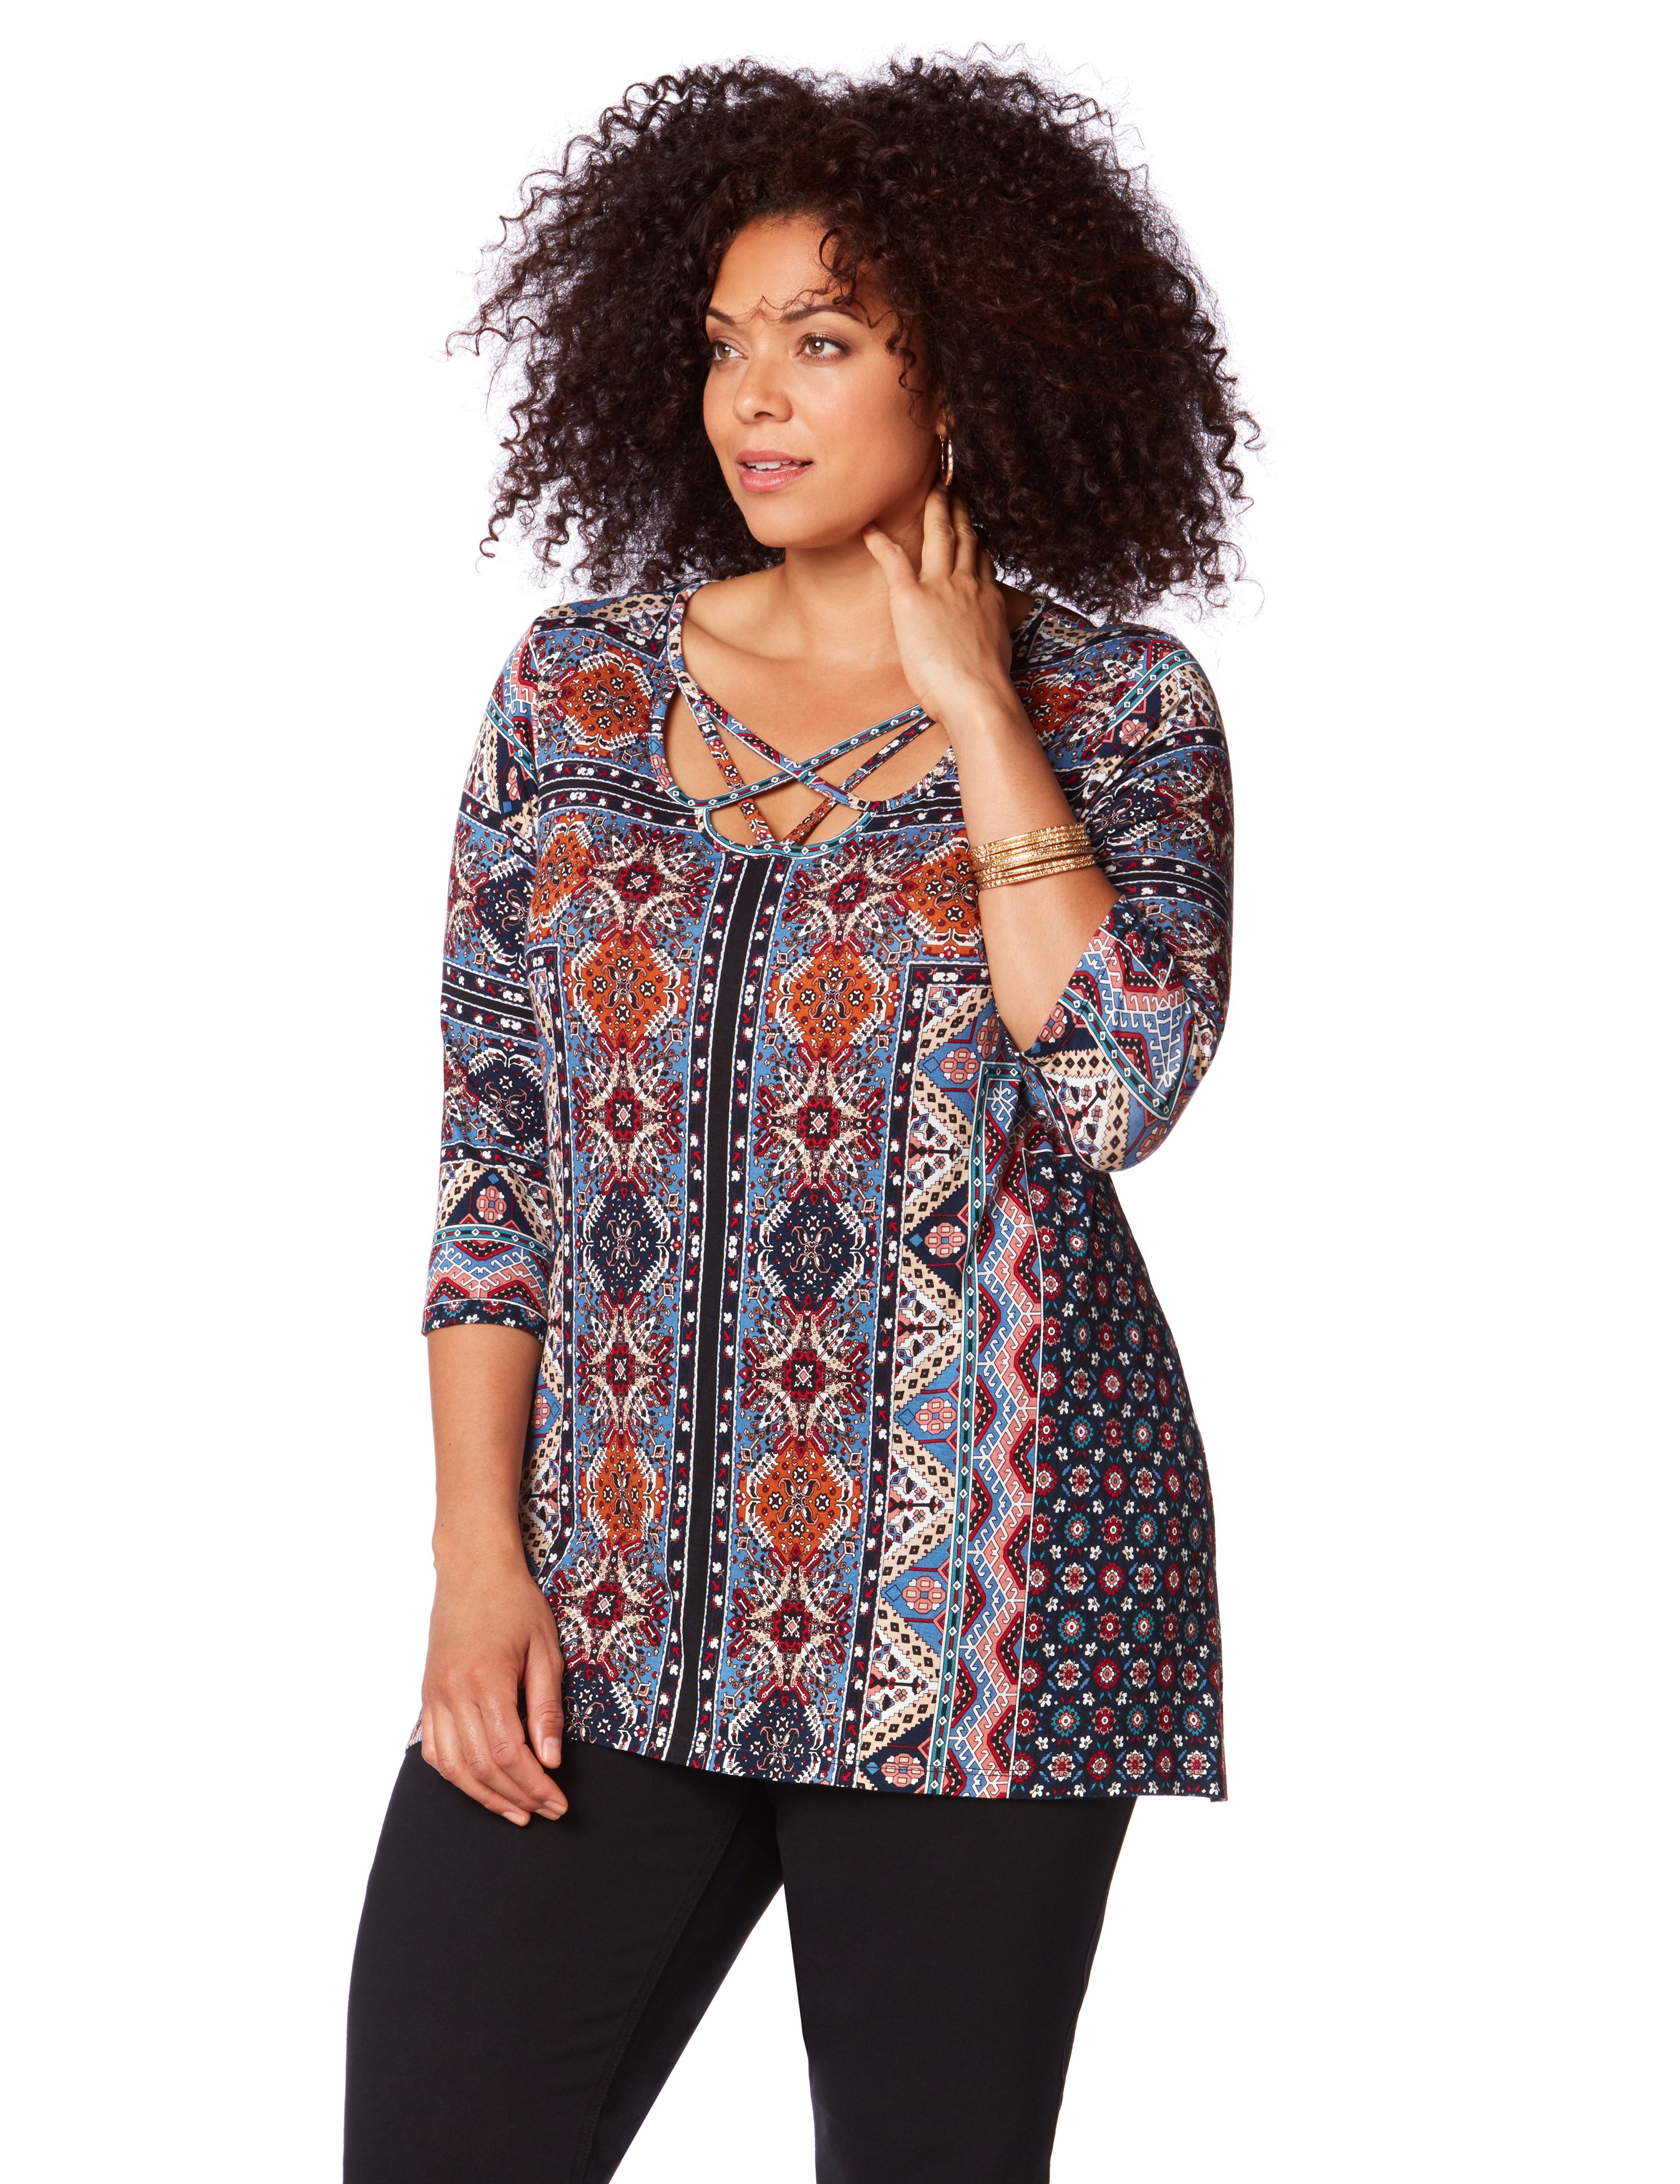 Clearance Plus Size Women's Tops on Sale | Catherines